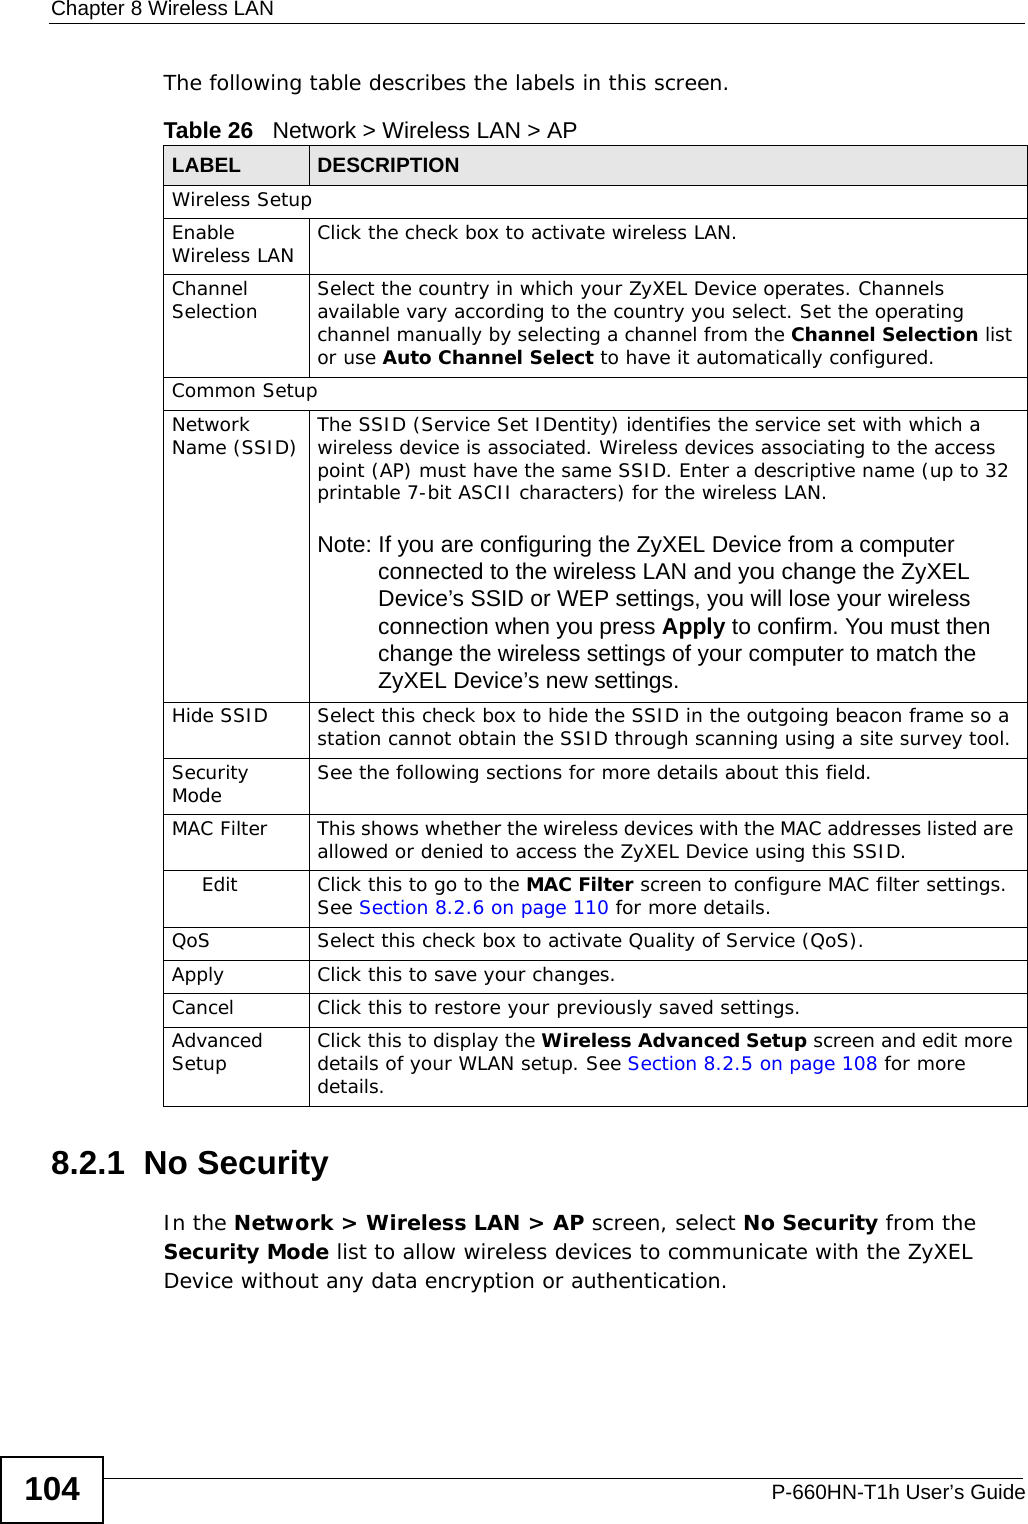 Chapter 8 Wireless LANP-660HN-T1h User’s Guide104The following table describes the labels in this screen.8.2.1  No SecurityIn the Network &gt; Wireless LAN &gt; AP screen, select No Security from the Security Mode list to allow wireless devices to communicate with the ZyXEL Device without any data encryption or authentication.Table 26   Network &gt; Wireless LAN &gt; APLABEL DESCRIPTIONWireless SetupEnable Wireless LAN Click the check box to activate wireless LAN.Channel Selection Select the country in which your ZyXEL Device operates. Channels available vary according to the country you select. Set the operating channel manually by selecting a channel from the Channel Selection list or use Auto Channel Select to have it automatically configured.Common SetupNetwork Name (SSID) The SSID (Service Set IDentity) identifies the service set with which a wireless device is associated. Wireless devices associating to the access point (AP) must have the same SSID. Enter a descriptive name (up to 32 printable 7-bit ASCII characters) for the wireless LAN. Note: If you are configuring the ZyXEL Device from a computer connected to the wireless LAN and you change the ZyXEL Device’s SSID or WEP settings, you will lose your wireless connection when you press Apply to confirm. You must then change the wireless settings of your computer to match the ZyXEL Device’s new settings.Hide SSID Select this check box to hide the SSID in the outgoing beacon frame so a station cannot obtain the SSID through scanning using a site survey tool.Security Mode See the following sections for more details about this field.MAC Filter  This shows whether the wireless devices with the MAC addresses listed are allowed or denied to access the ZyXEL Device using this SSID.Edit Click this to go to the MAC Filter screen to configure MAC filter settings. See Section 8.2.6 on page 110 for more details.QoS Select this check box to activate Quality of Service (QoS). Apply Click this to save your changes.Cancel Click this to restore your previously saved settings.Advanced Setup Click this to display the Wireless Advanced Setup screen and edit more details of your WLAN setup. See Section 8.2.5 on page 108 for more details.